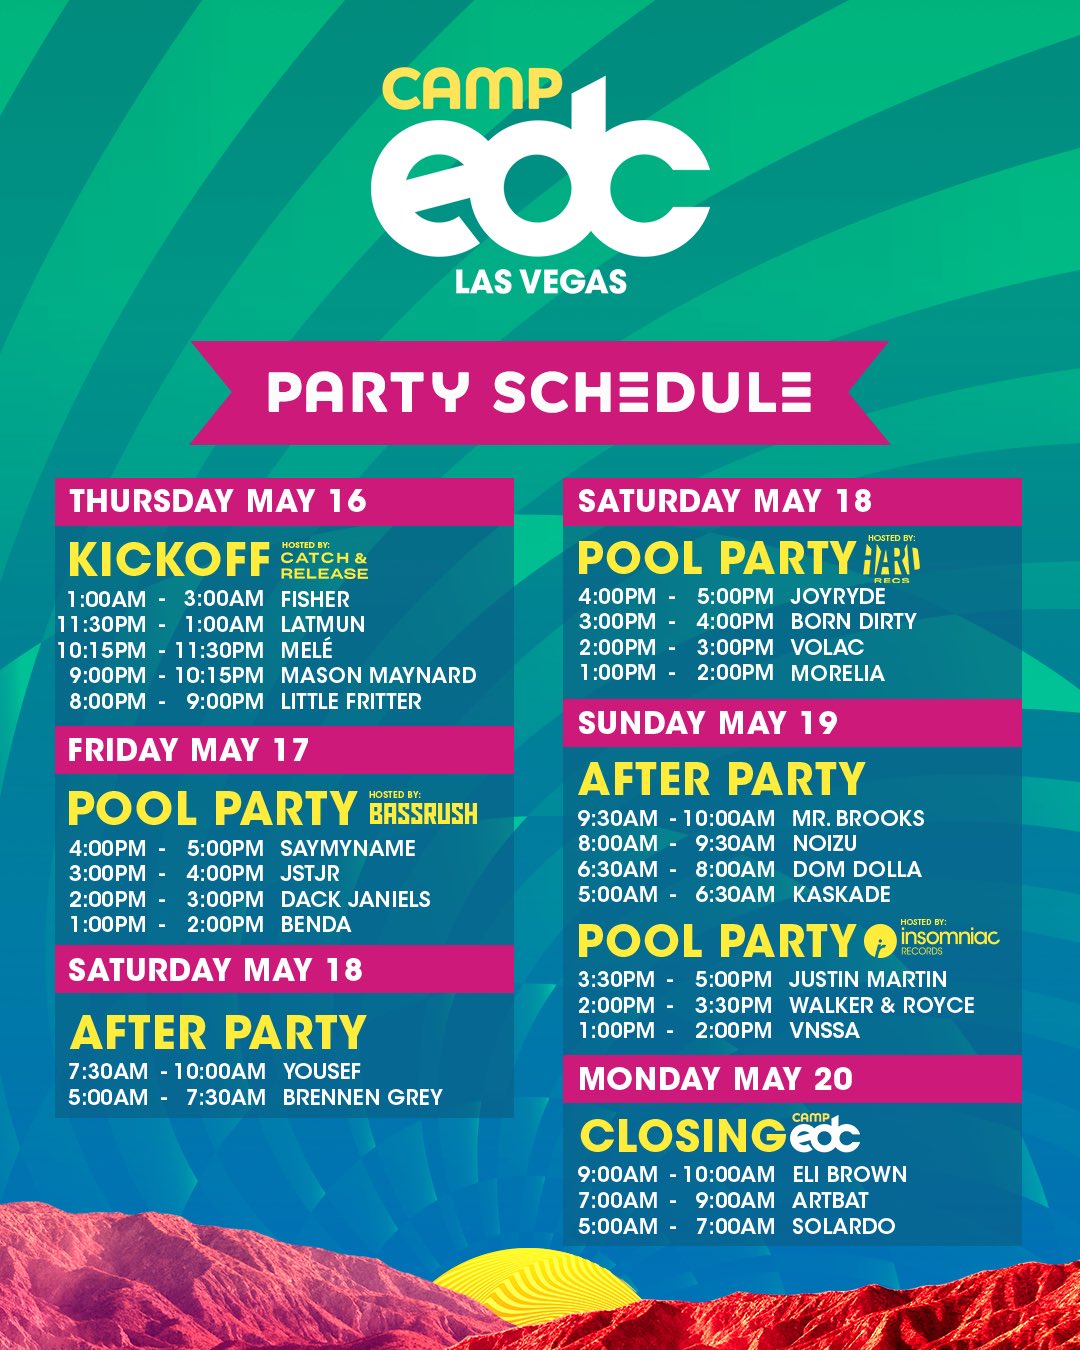 Camp EDC 2019 Party Schedule